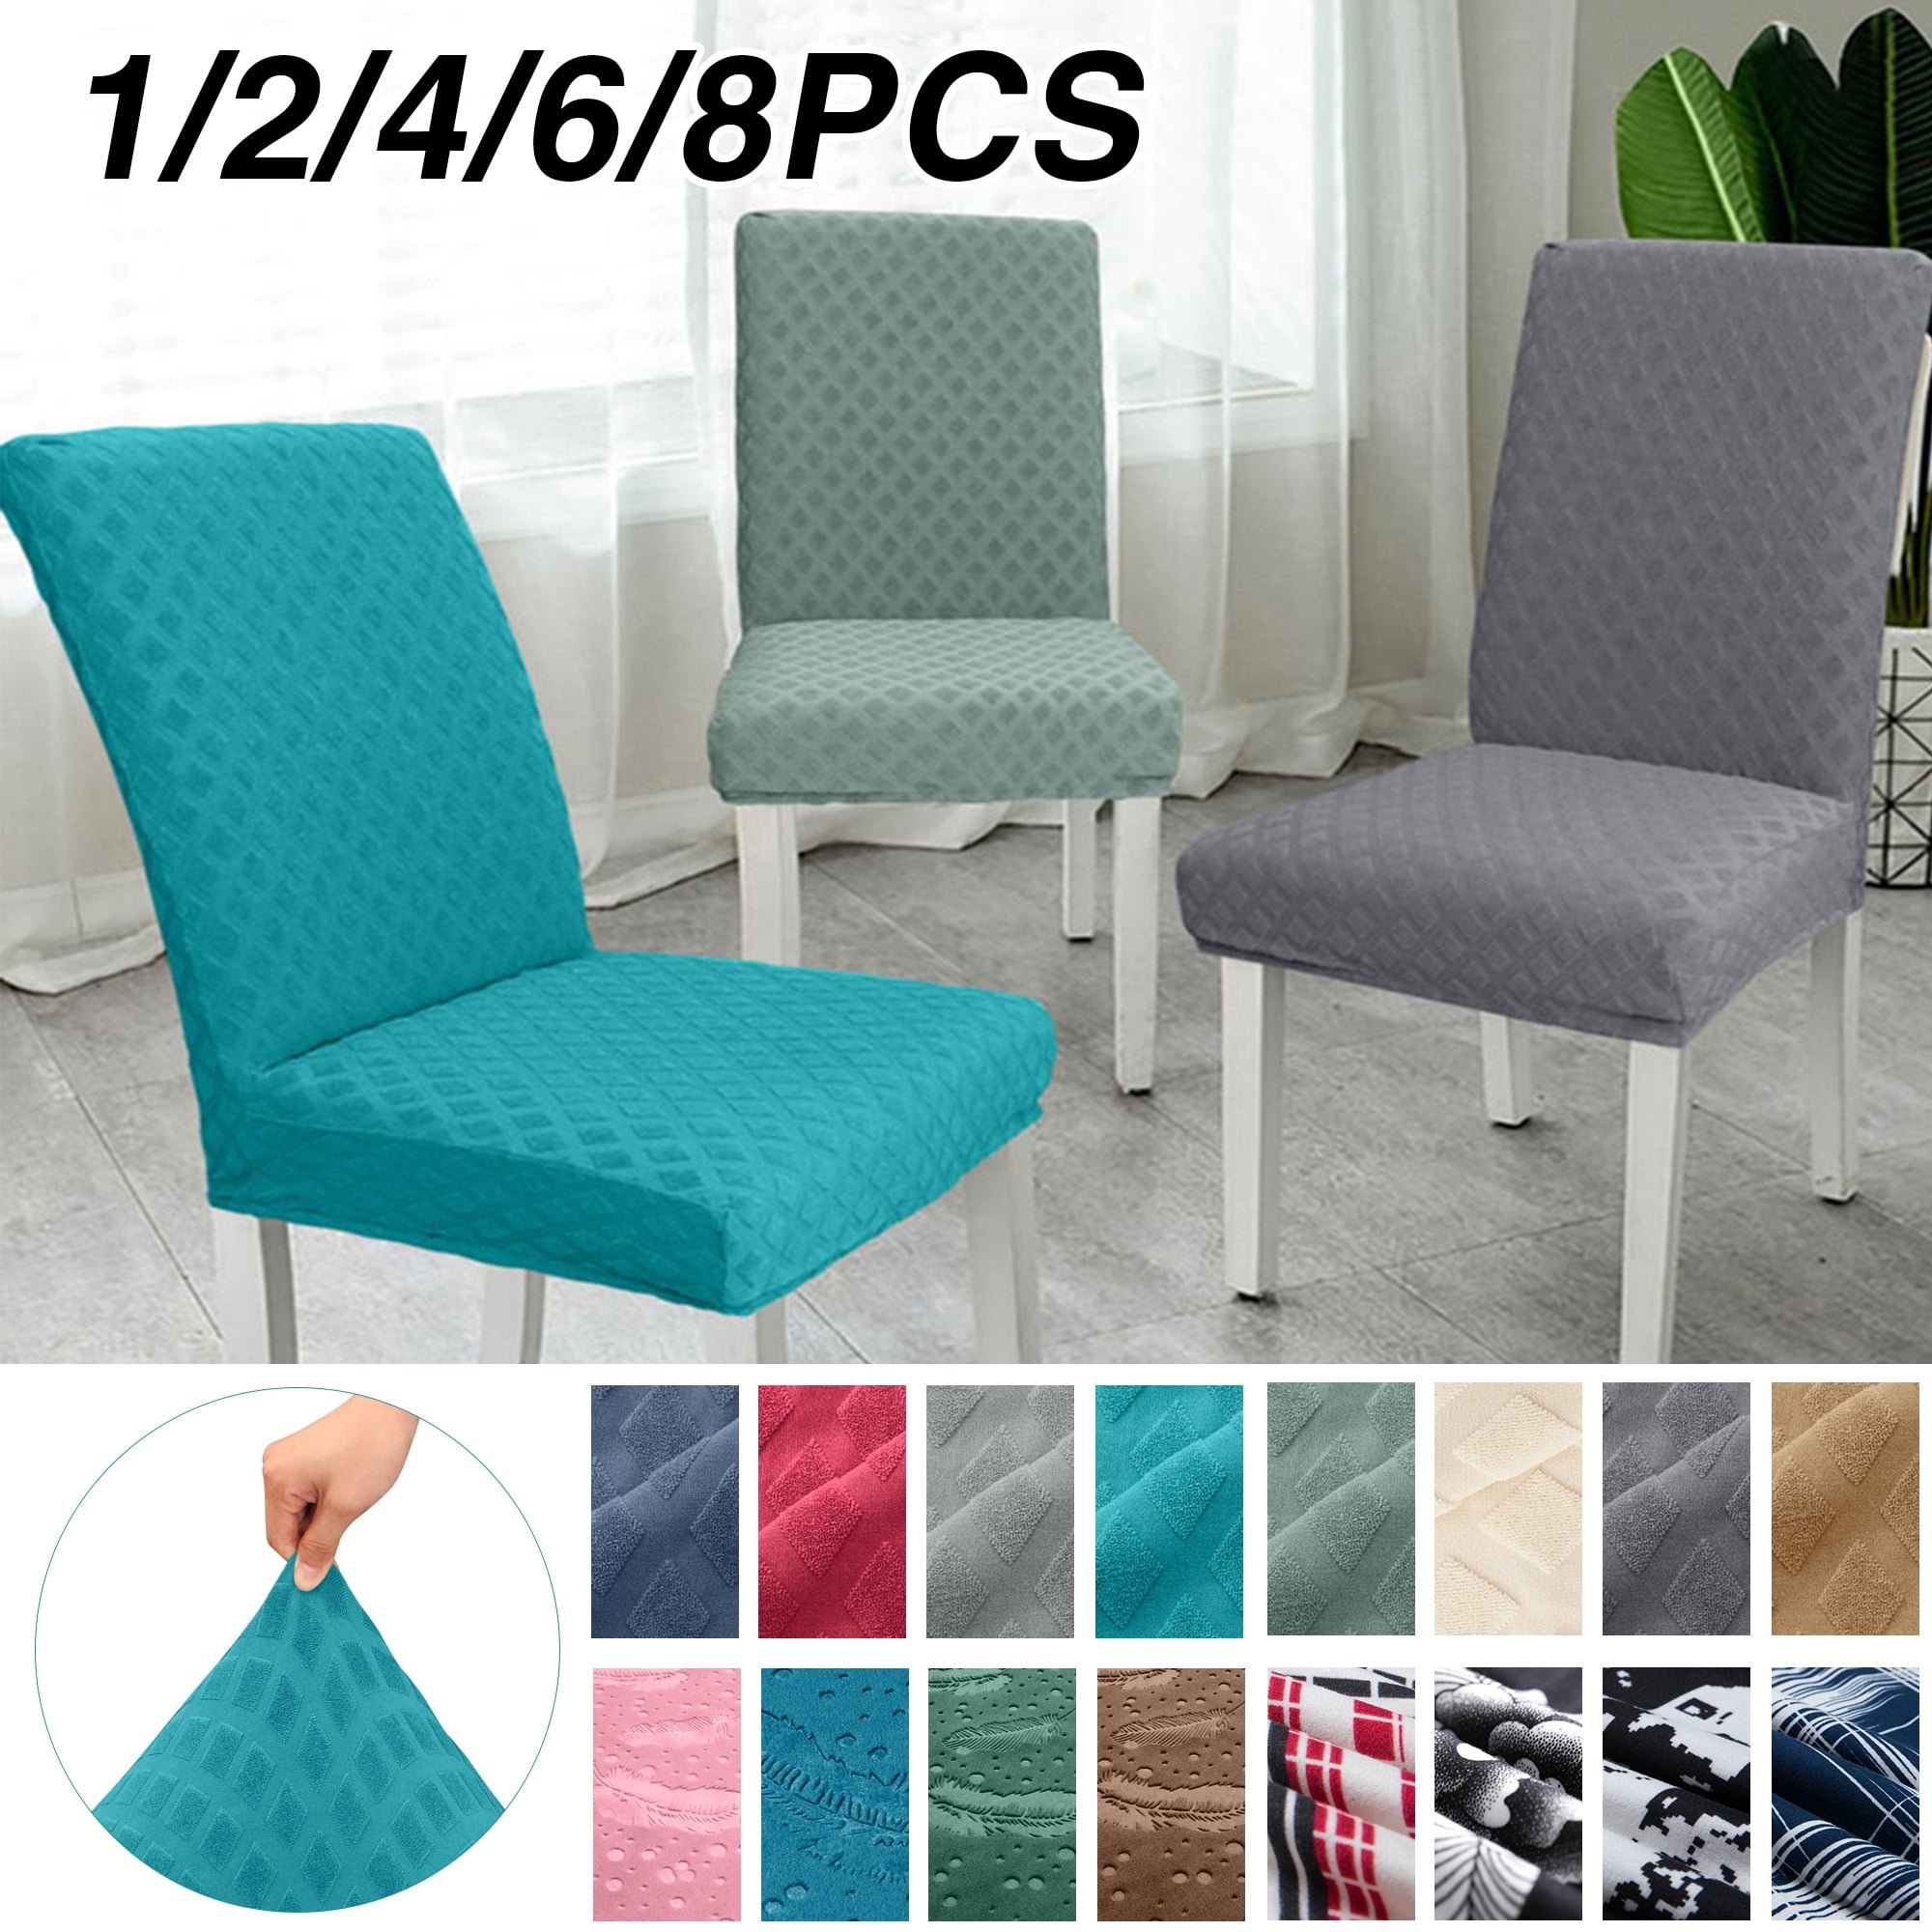 1/4/6 Pcs Jacquard Plain Chair Cover Slipcover Chair Protectors Dining Covers 